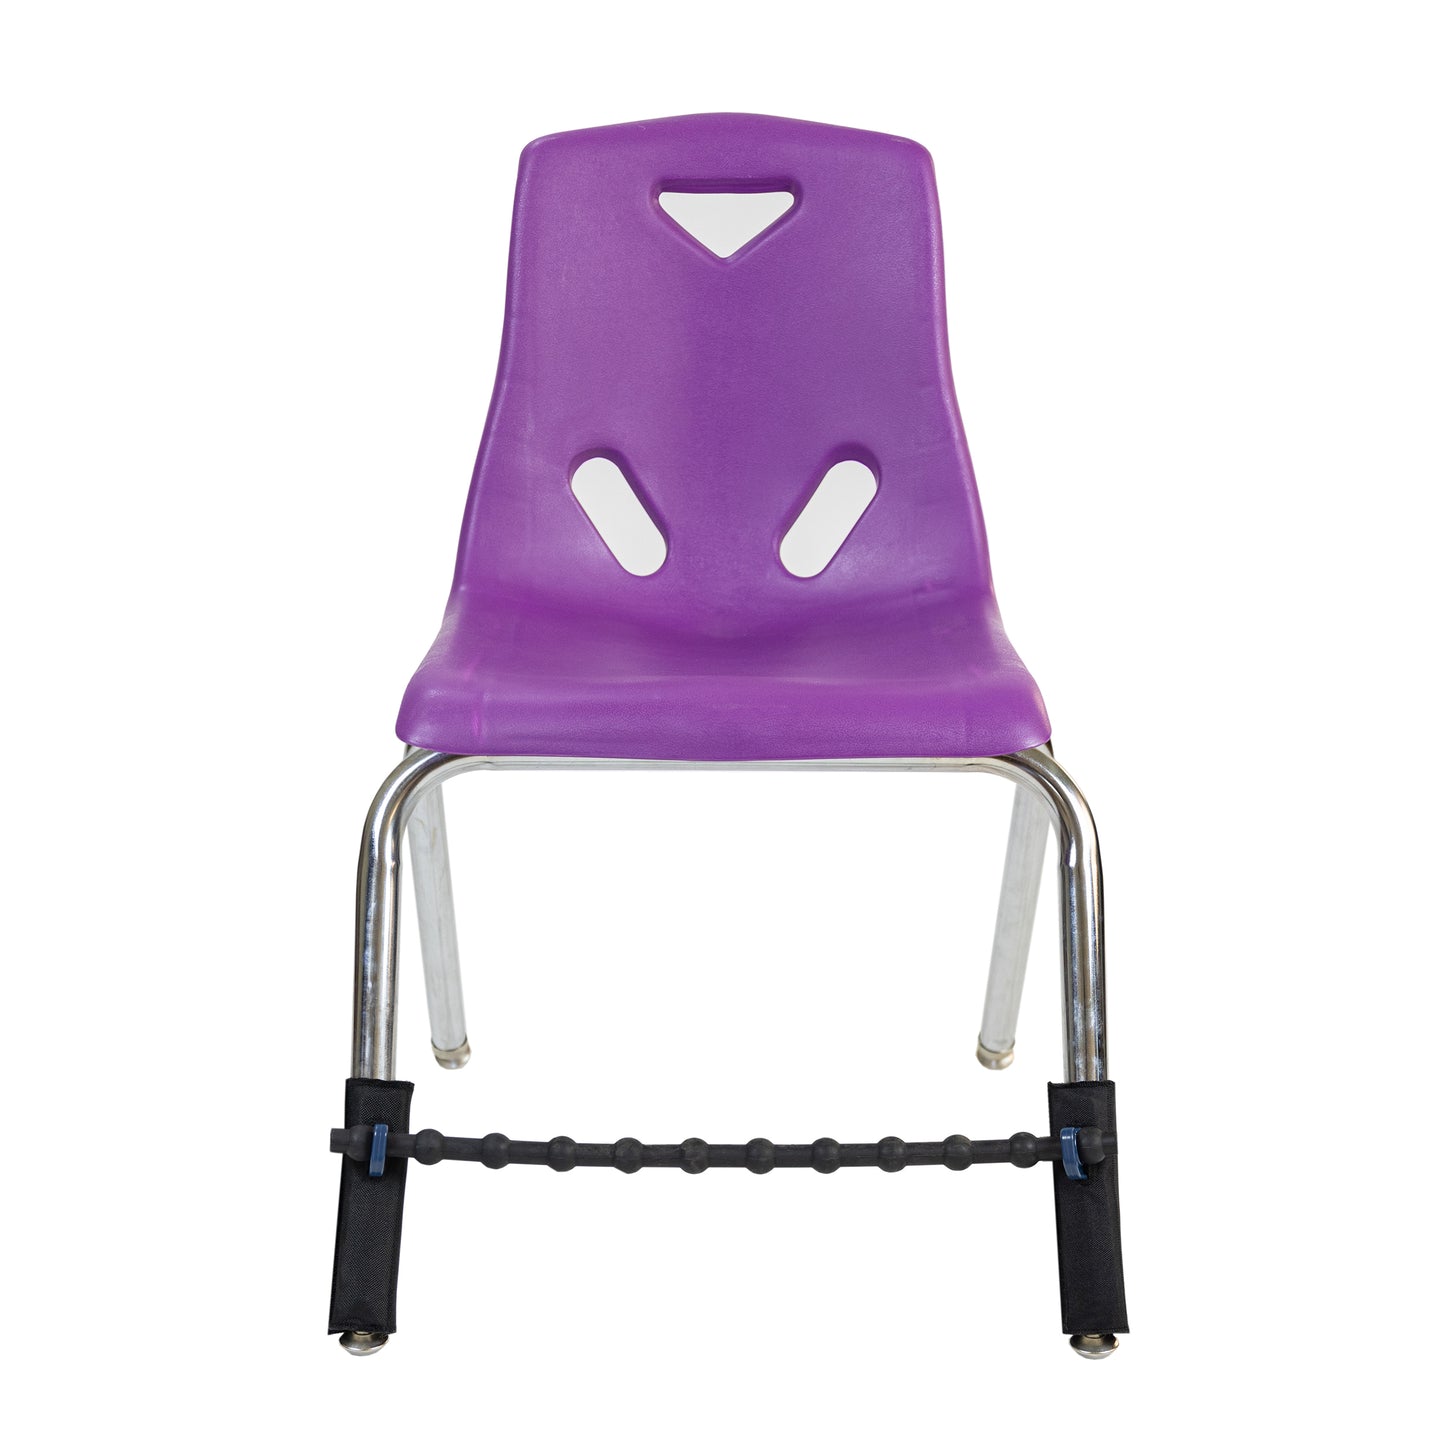 Universal Bouncy Band For Chairs